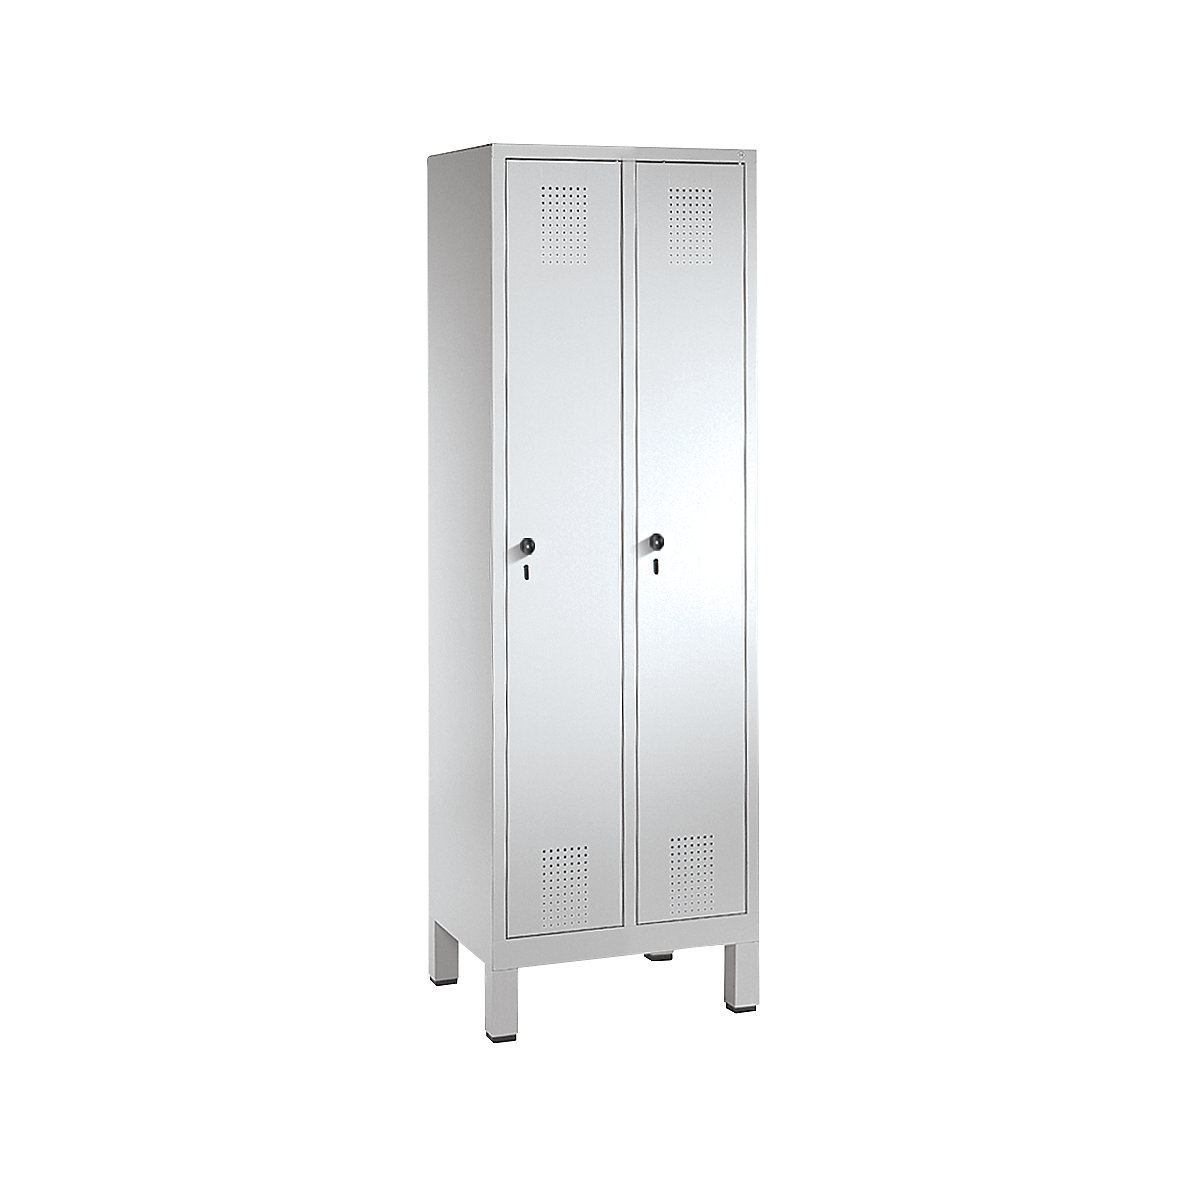 EVOLO cloakroom locker – C+P, with plastic feet, 2 compartments, compartment width 300 mm, light grey-7